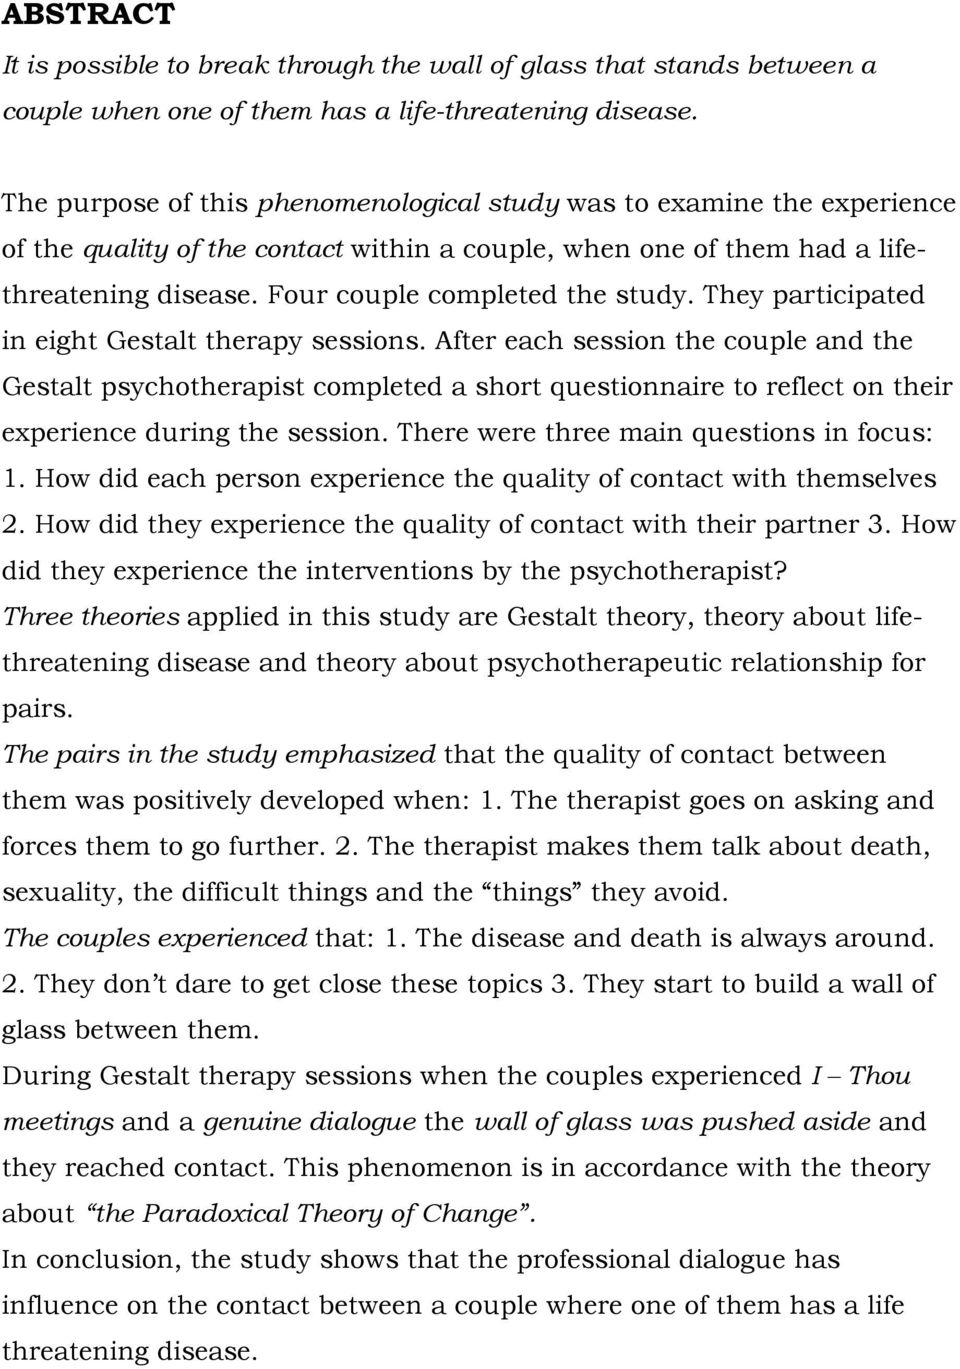 They participated in eight Gestalt therapy sessions. After each session the couple and the Gestalt psychotherapist completed a short questionnaire to reflect on their experience during the session.